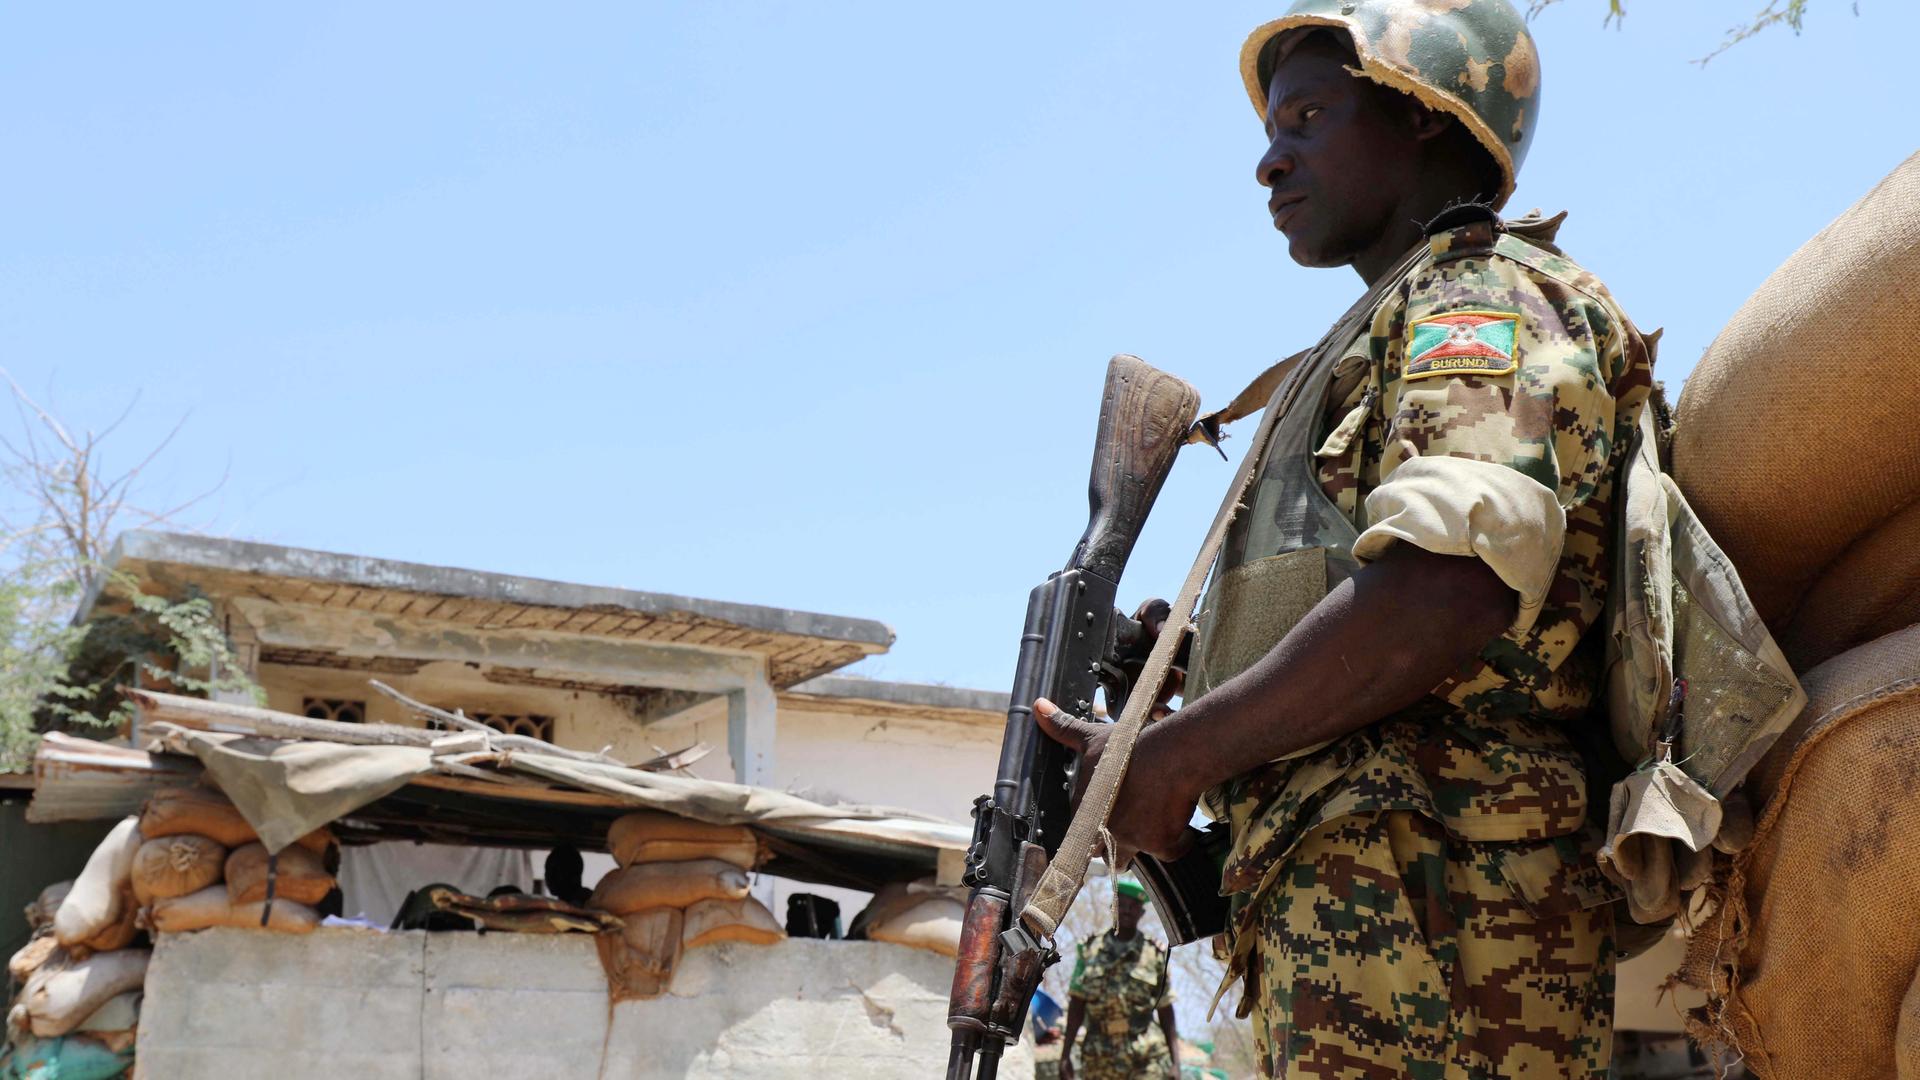 A Burundian African Union Mission in Somalia (AMISOM) peacekeeper stands guard before being replaced by the Somali military at Jaale Siad Military academy in Mogadishu, Somalia.